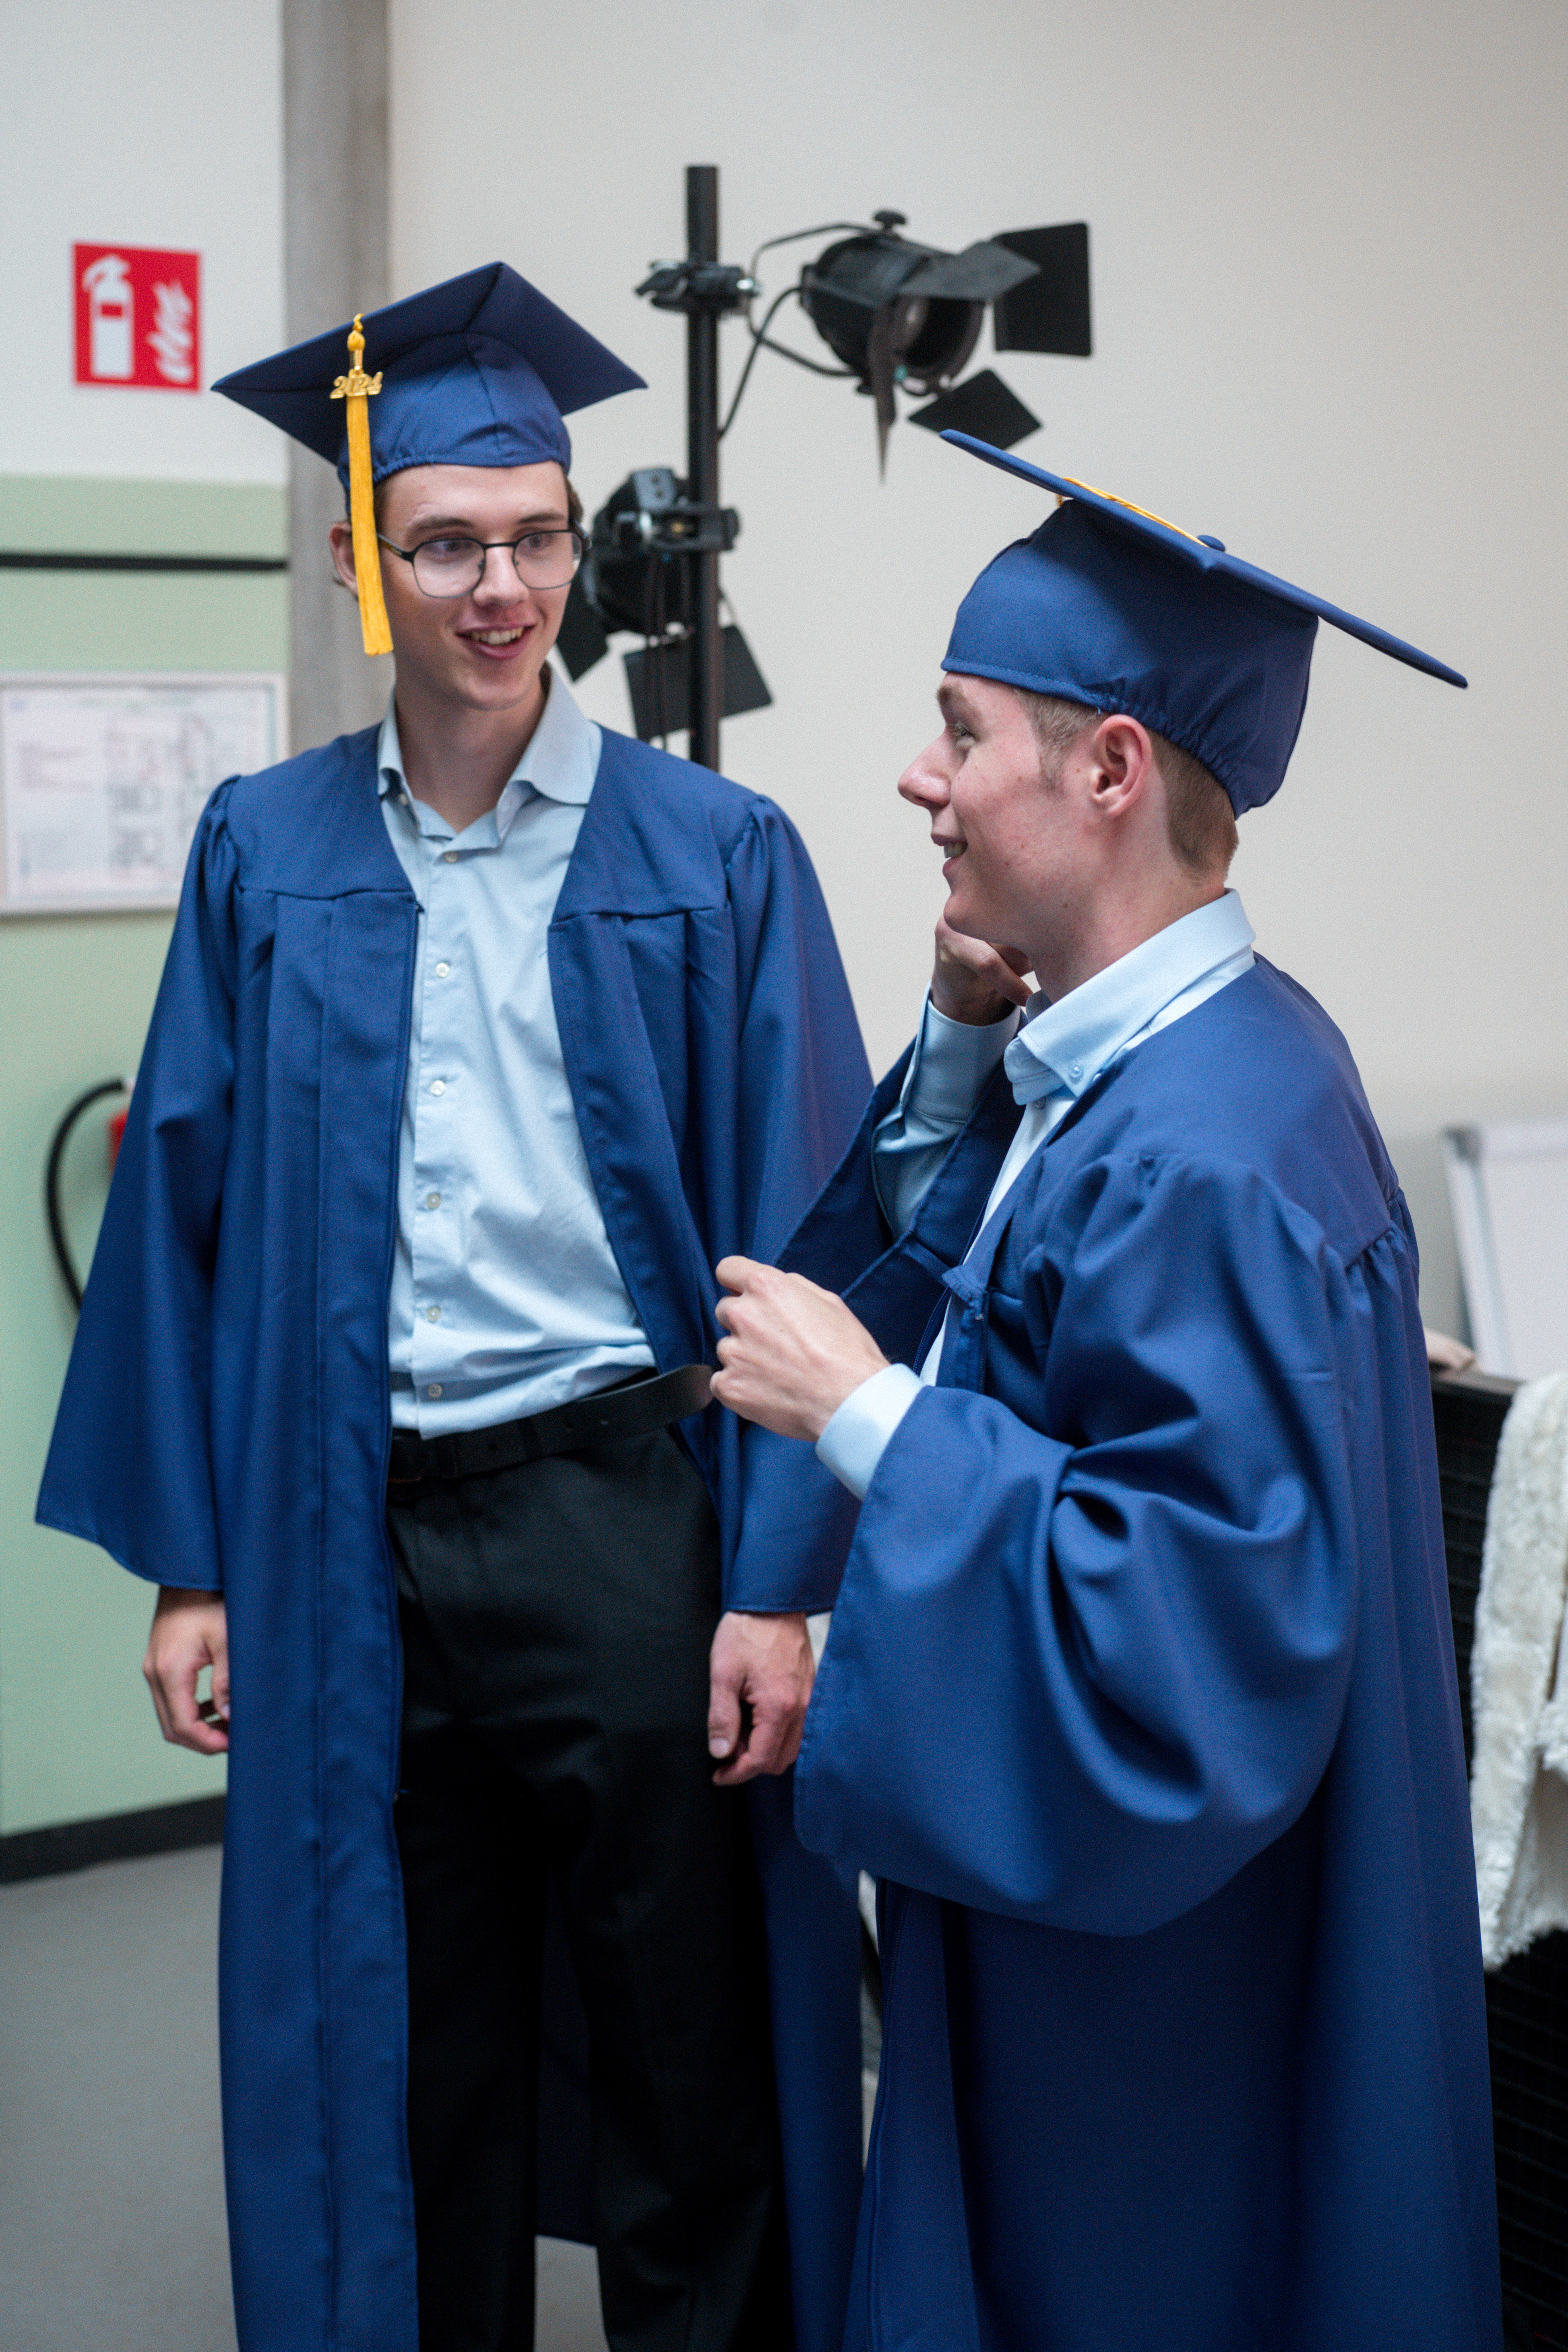 Teun van Rossum and Thijs Vogely in their graduation gown